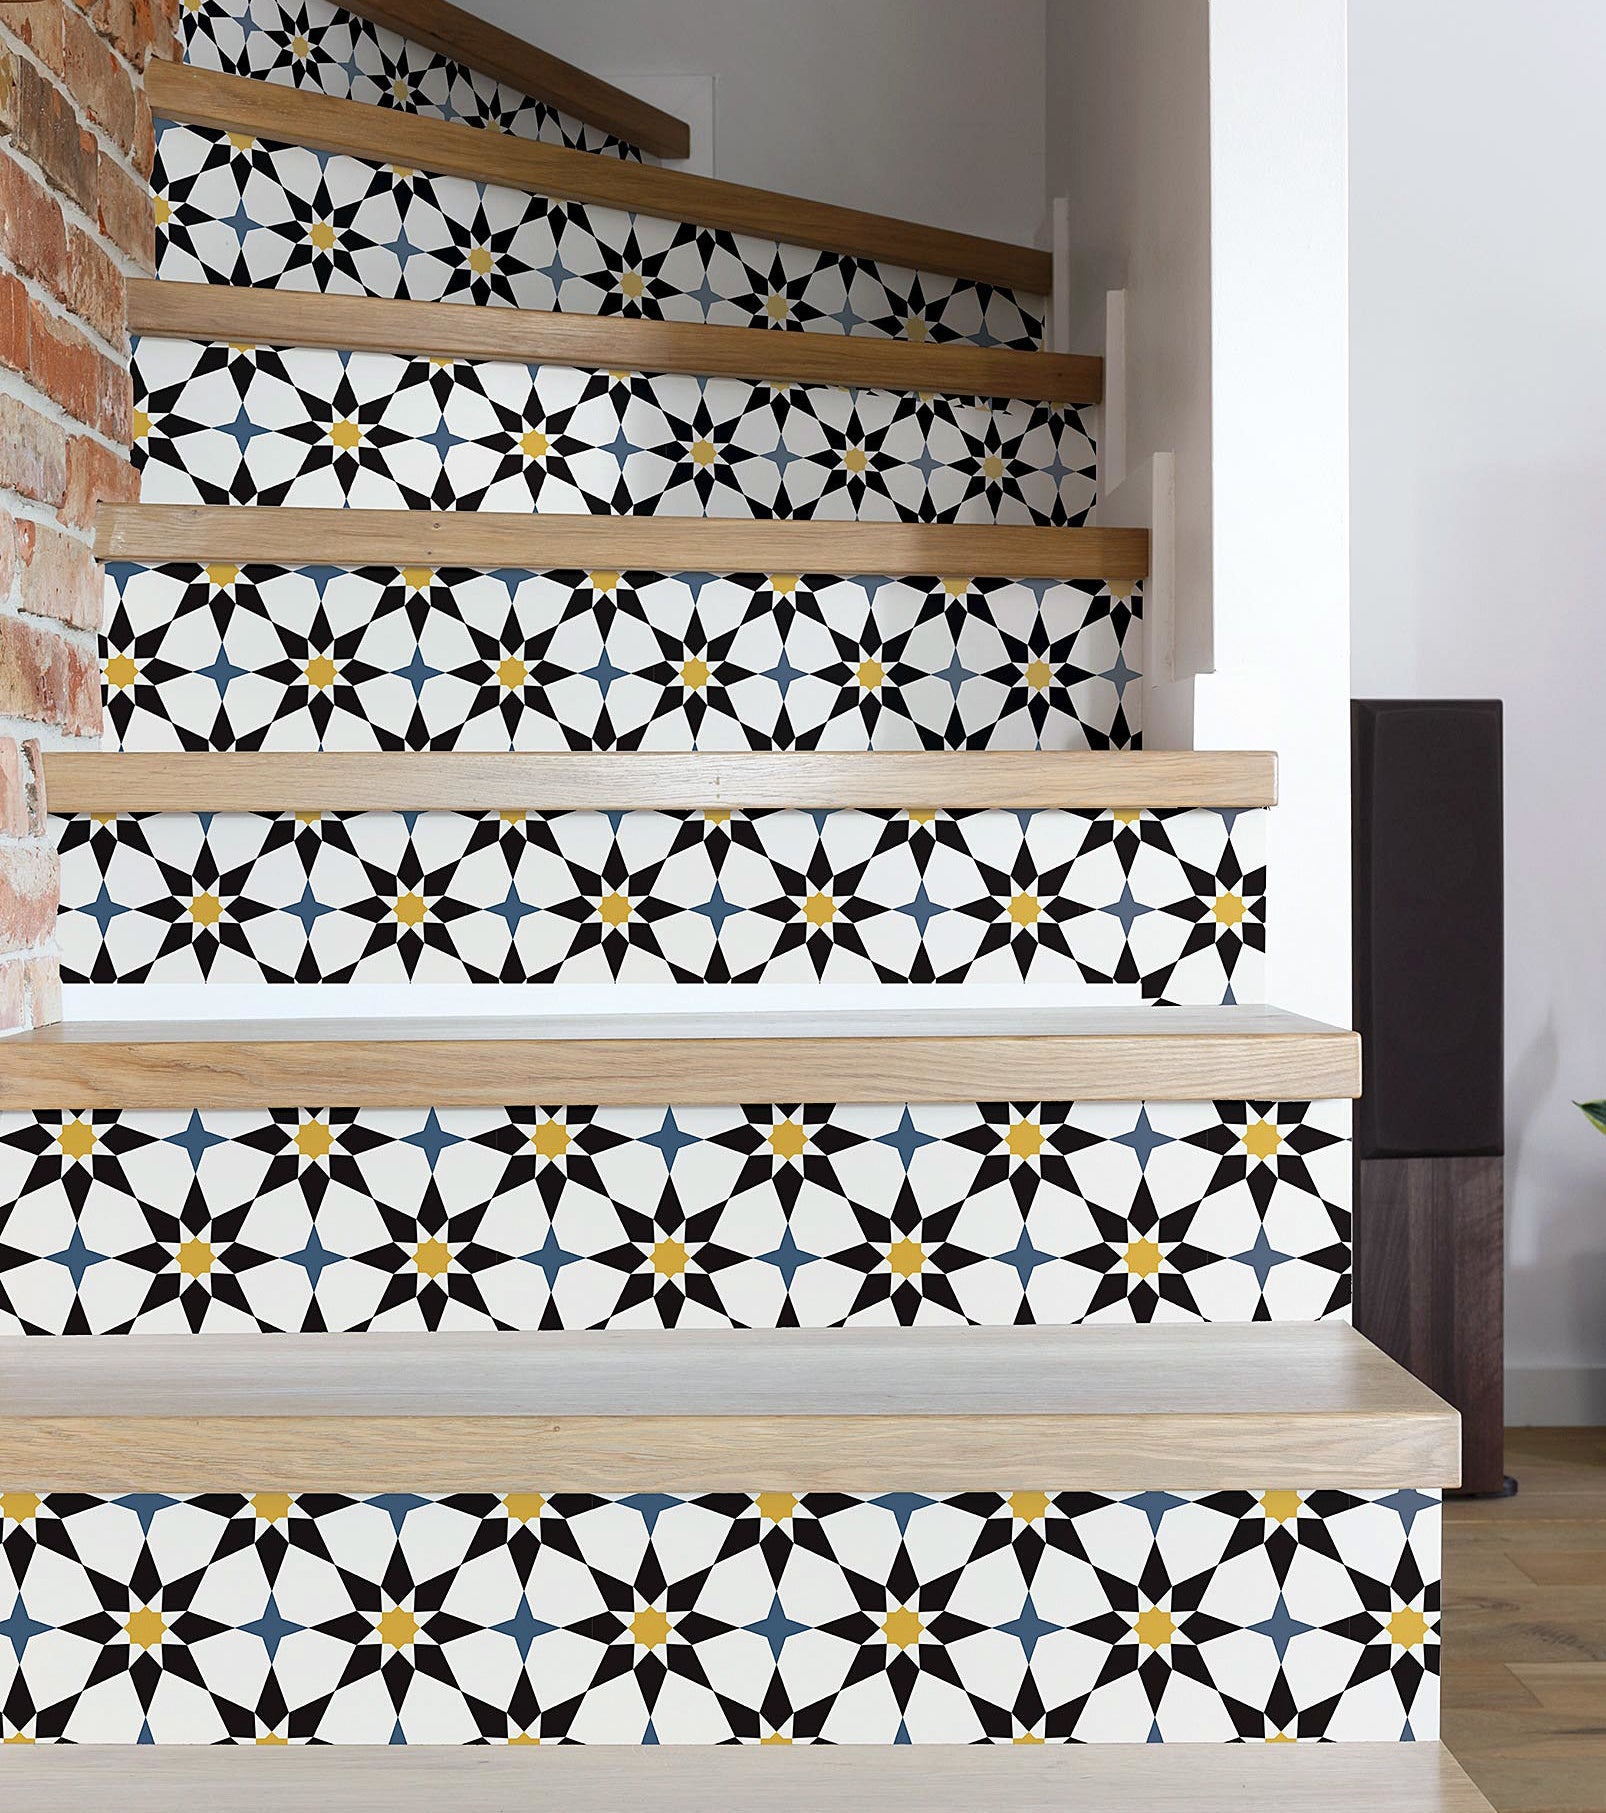 The self-adhesive wallpaper lining a staircase 